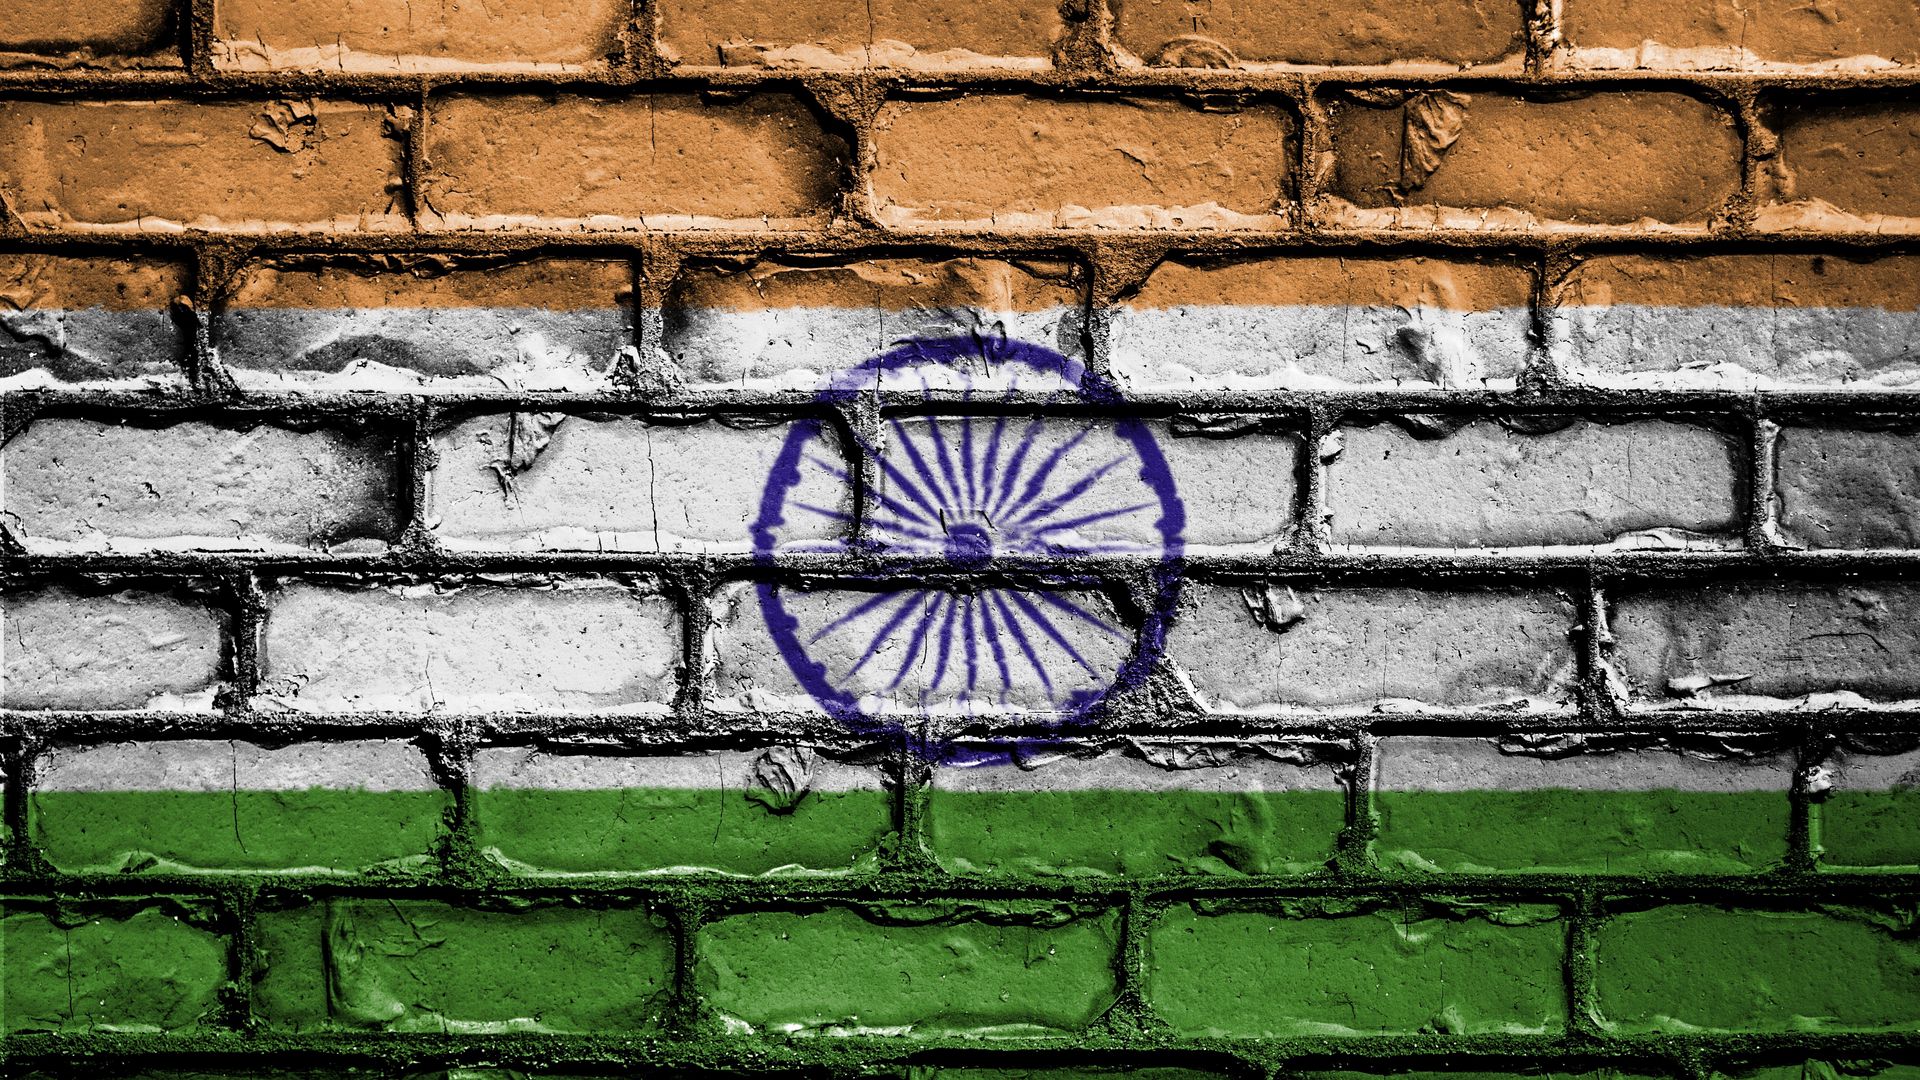 Download wallpaper 1920x1080 india, flag, texture, wall, brick, paint full  hd, hdtv, fhd, 1080p hd background